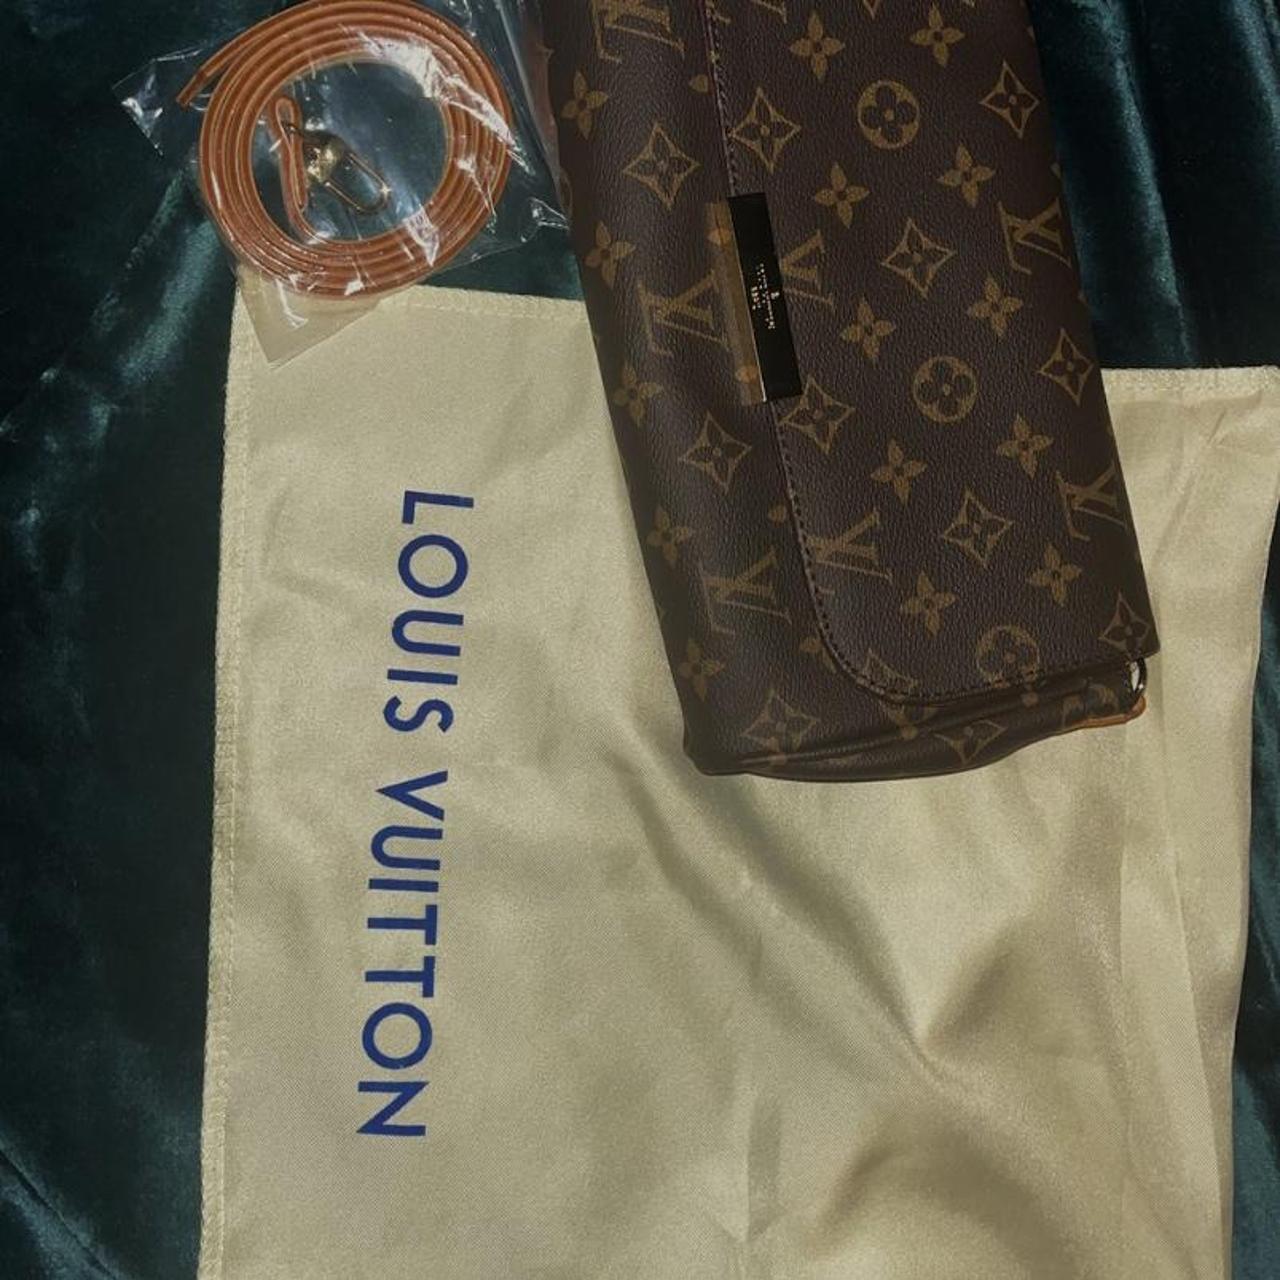 LV bag from 2017 , code on it is sp3117, #louisvuitton